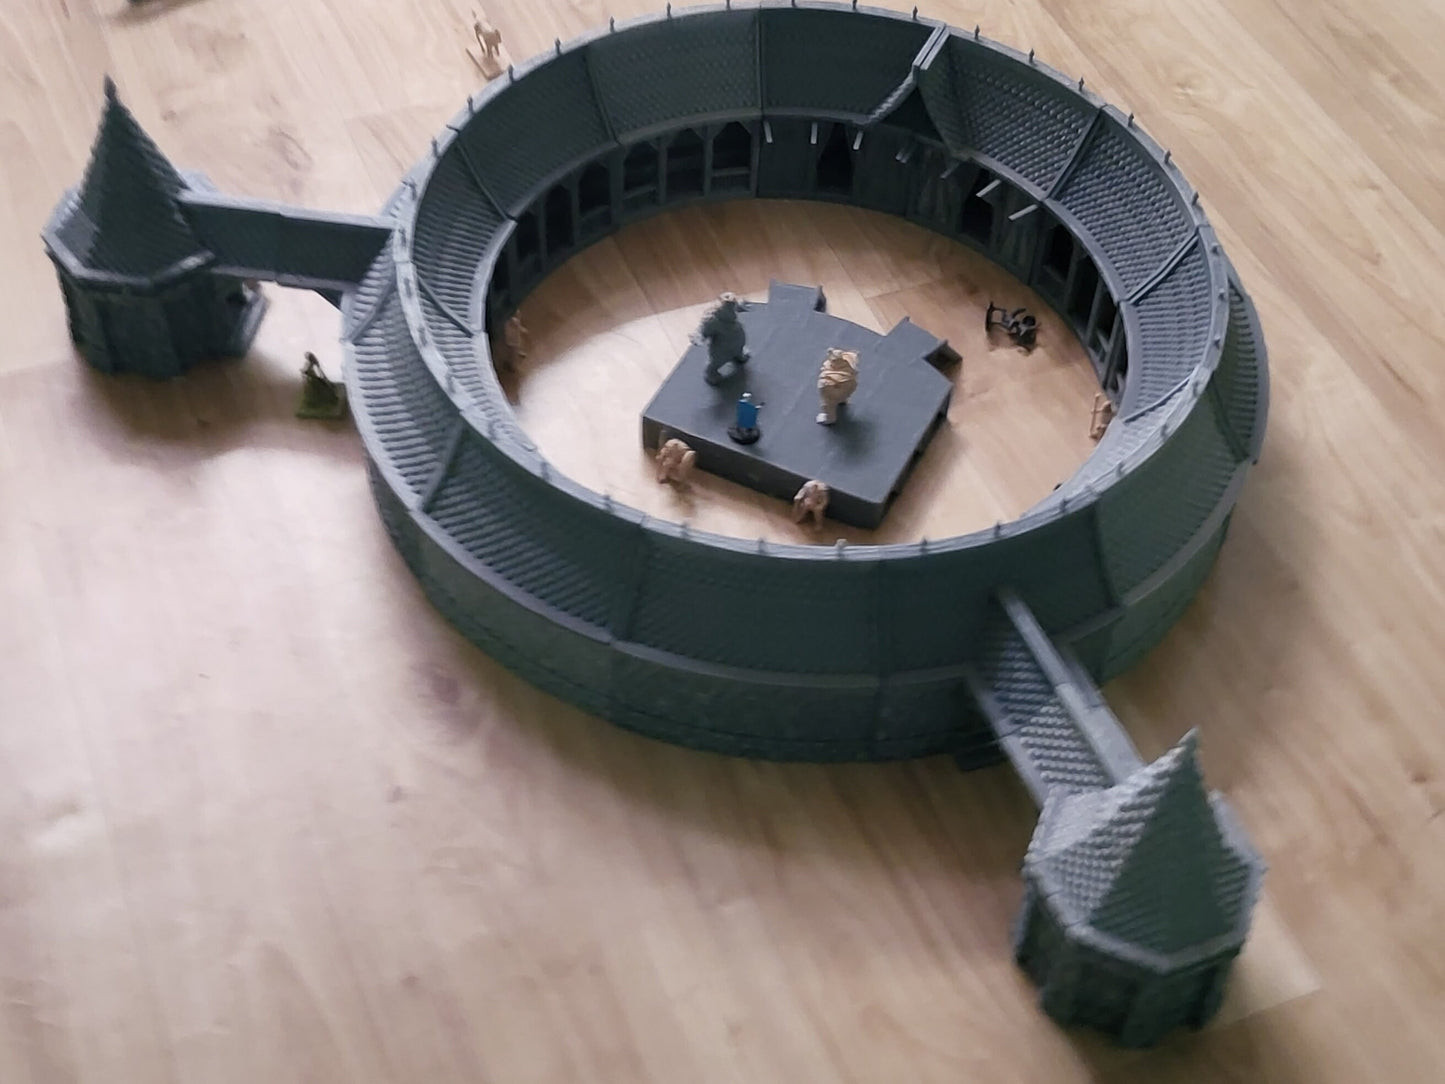 Greek Theater, Arena, Gladiator, Theater, Stage, Gladiator Arena, Coliseum, Fight pit, Thunderdome, Mad Max, Greek, Play, Terrain, Arena Terrain, Dungeons and Dragons, Warhammer, Warhammer Terrain, 32mm Terrain, Tolkien, Great Arena